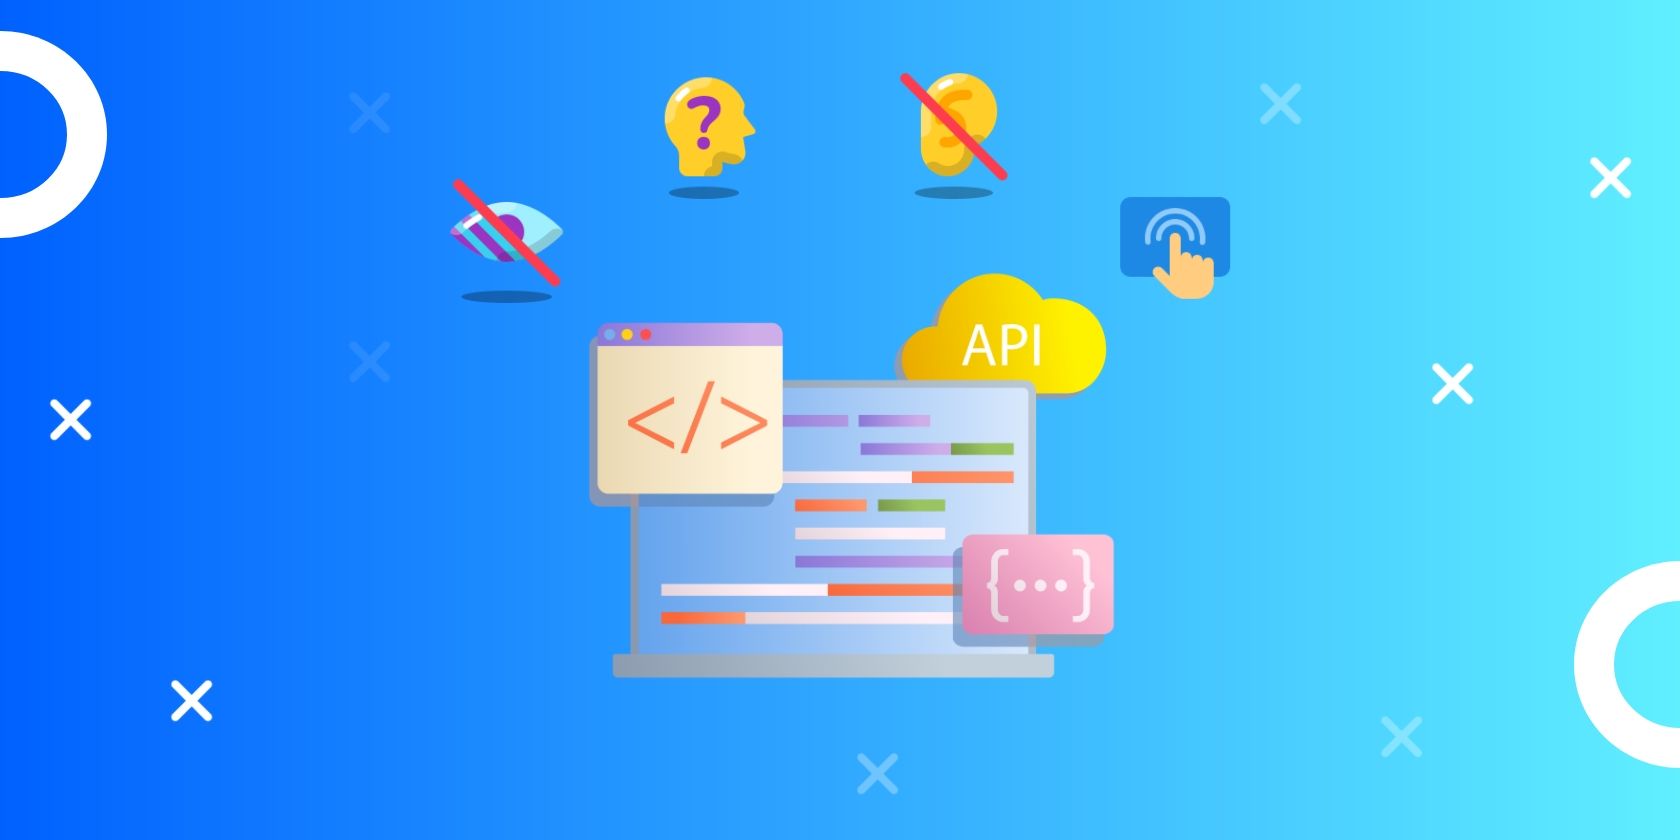 web accessibility icons with a vector image depicting programming